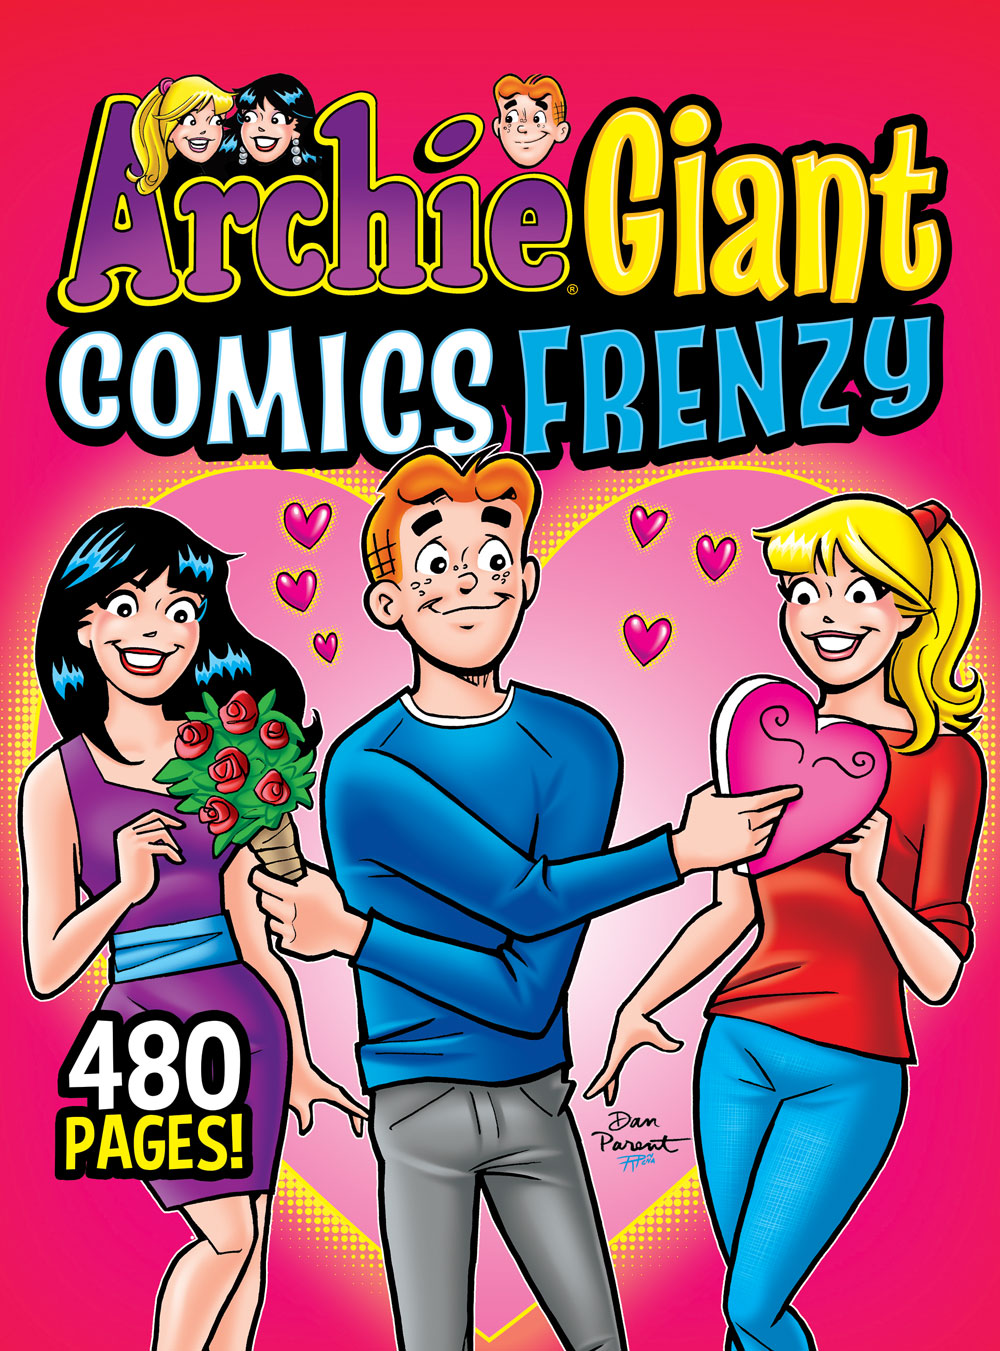 Archie hands Betty and Veronica Valentine's Day gifts simultaneously, with hearts floating in the background. Veronica gets a bouquet of roses and Betty gets a box of chocolate.